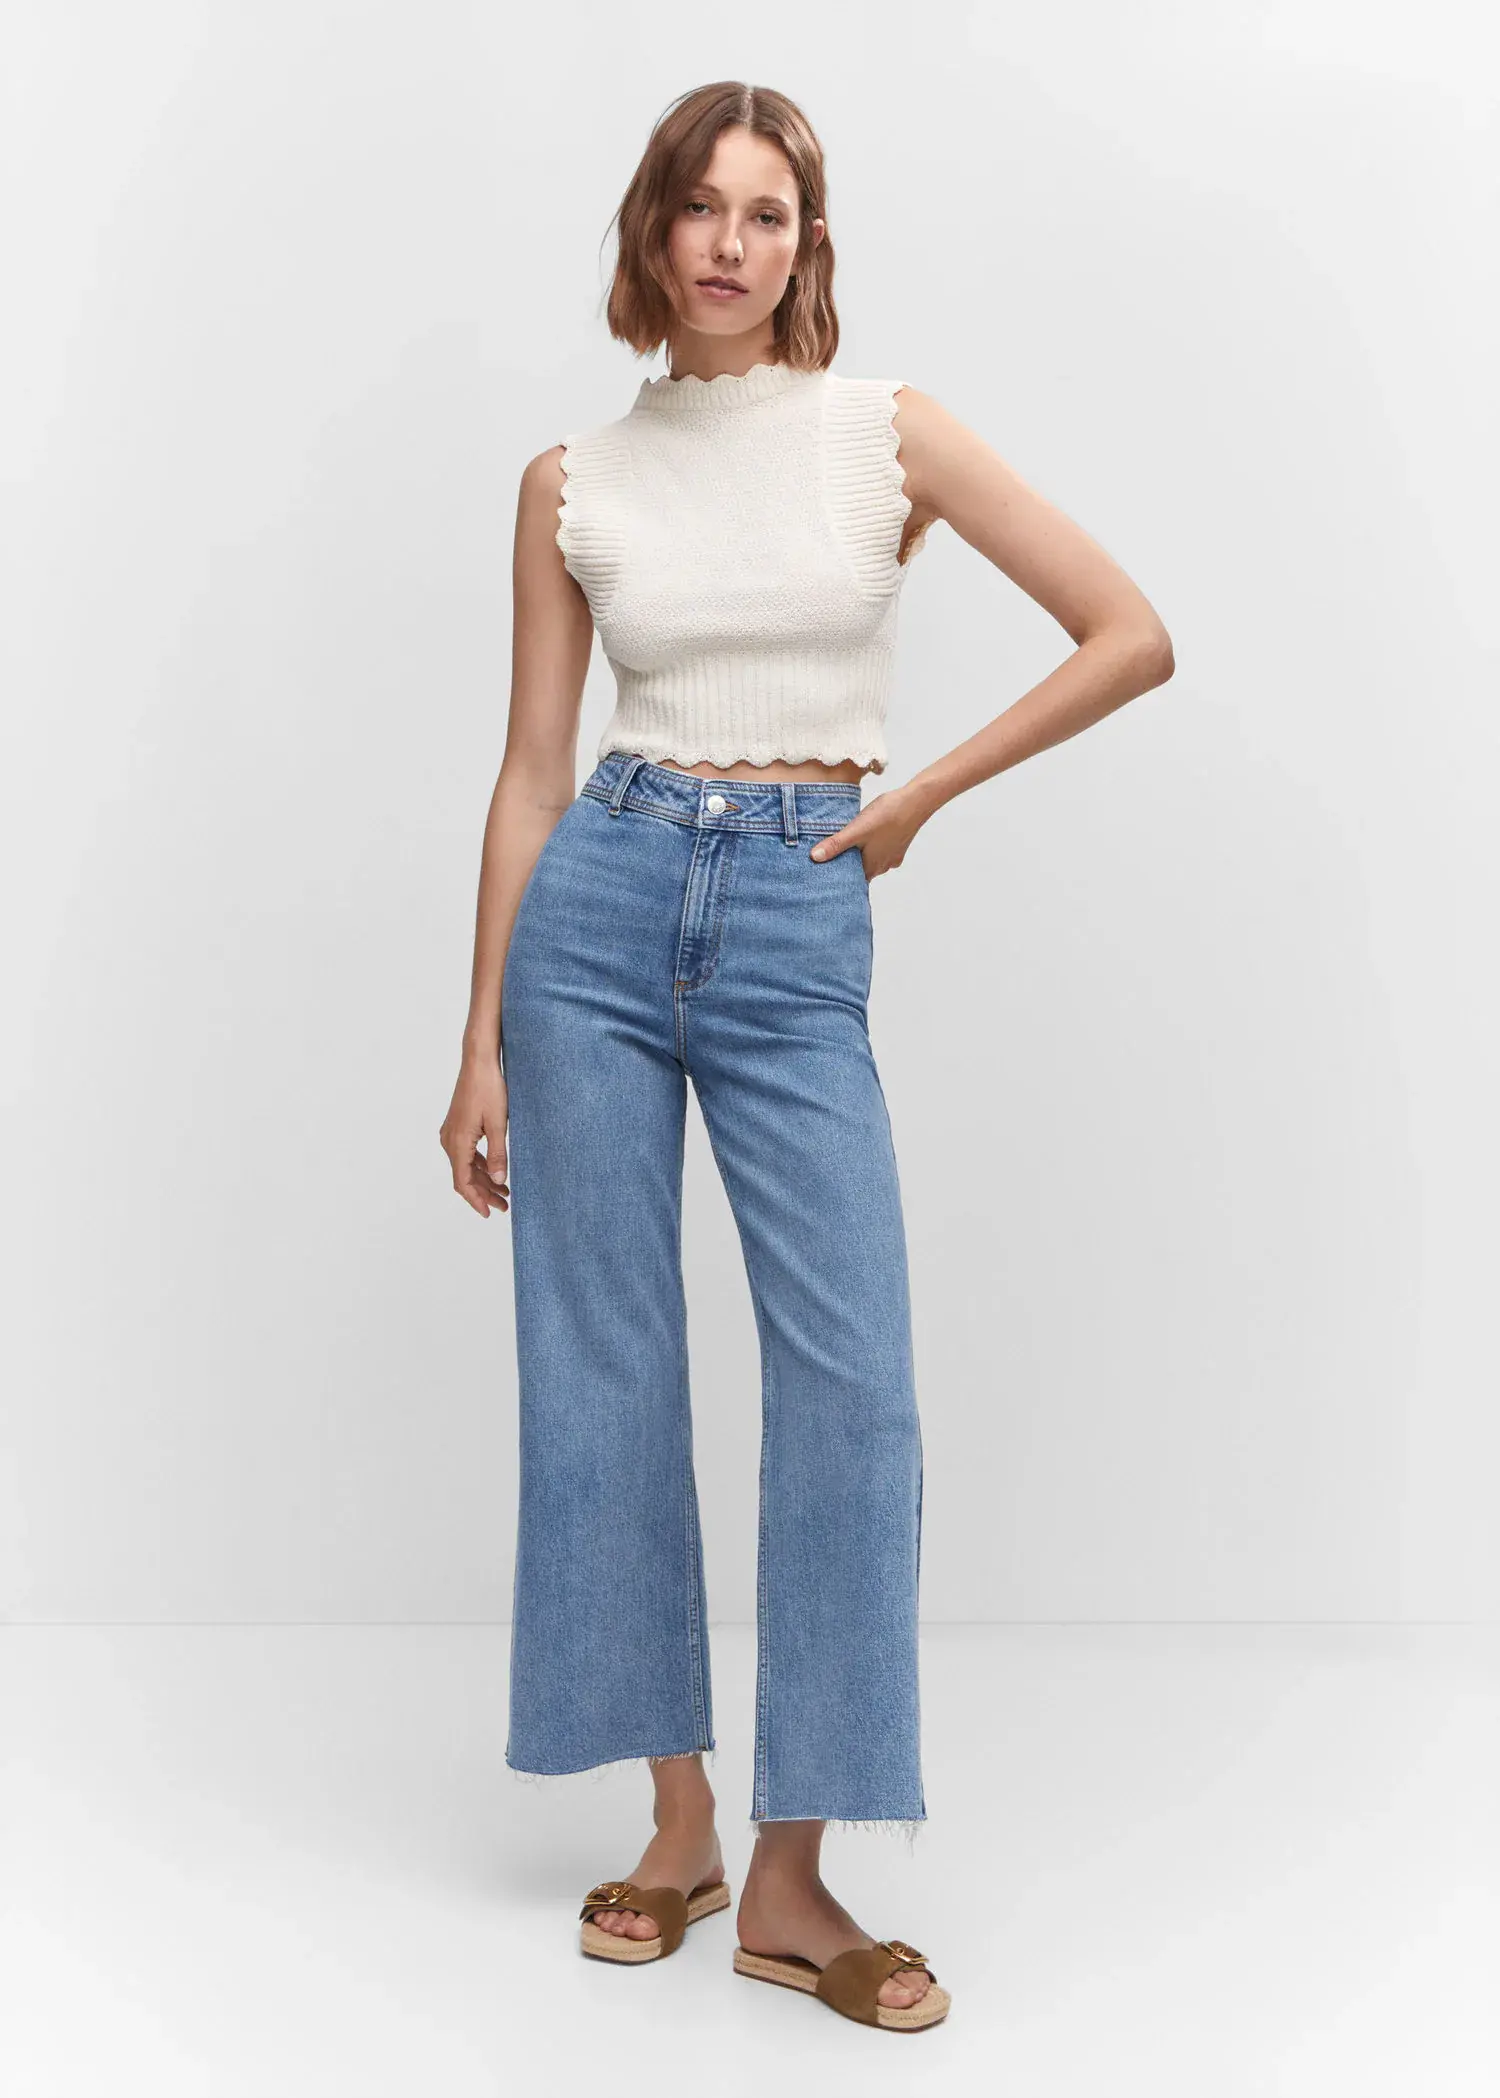 Mango Jeans culotte high waist. a woman in a white top and blue jeans. 